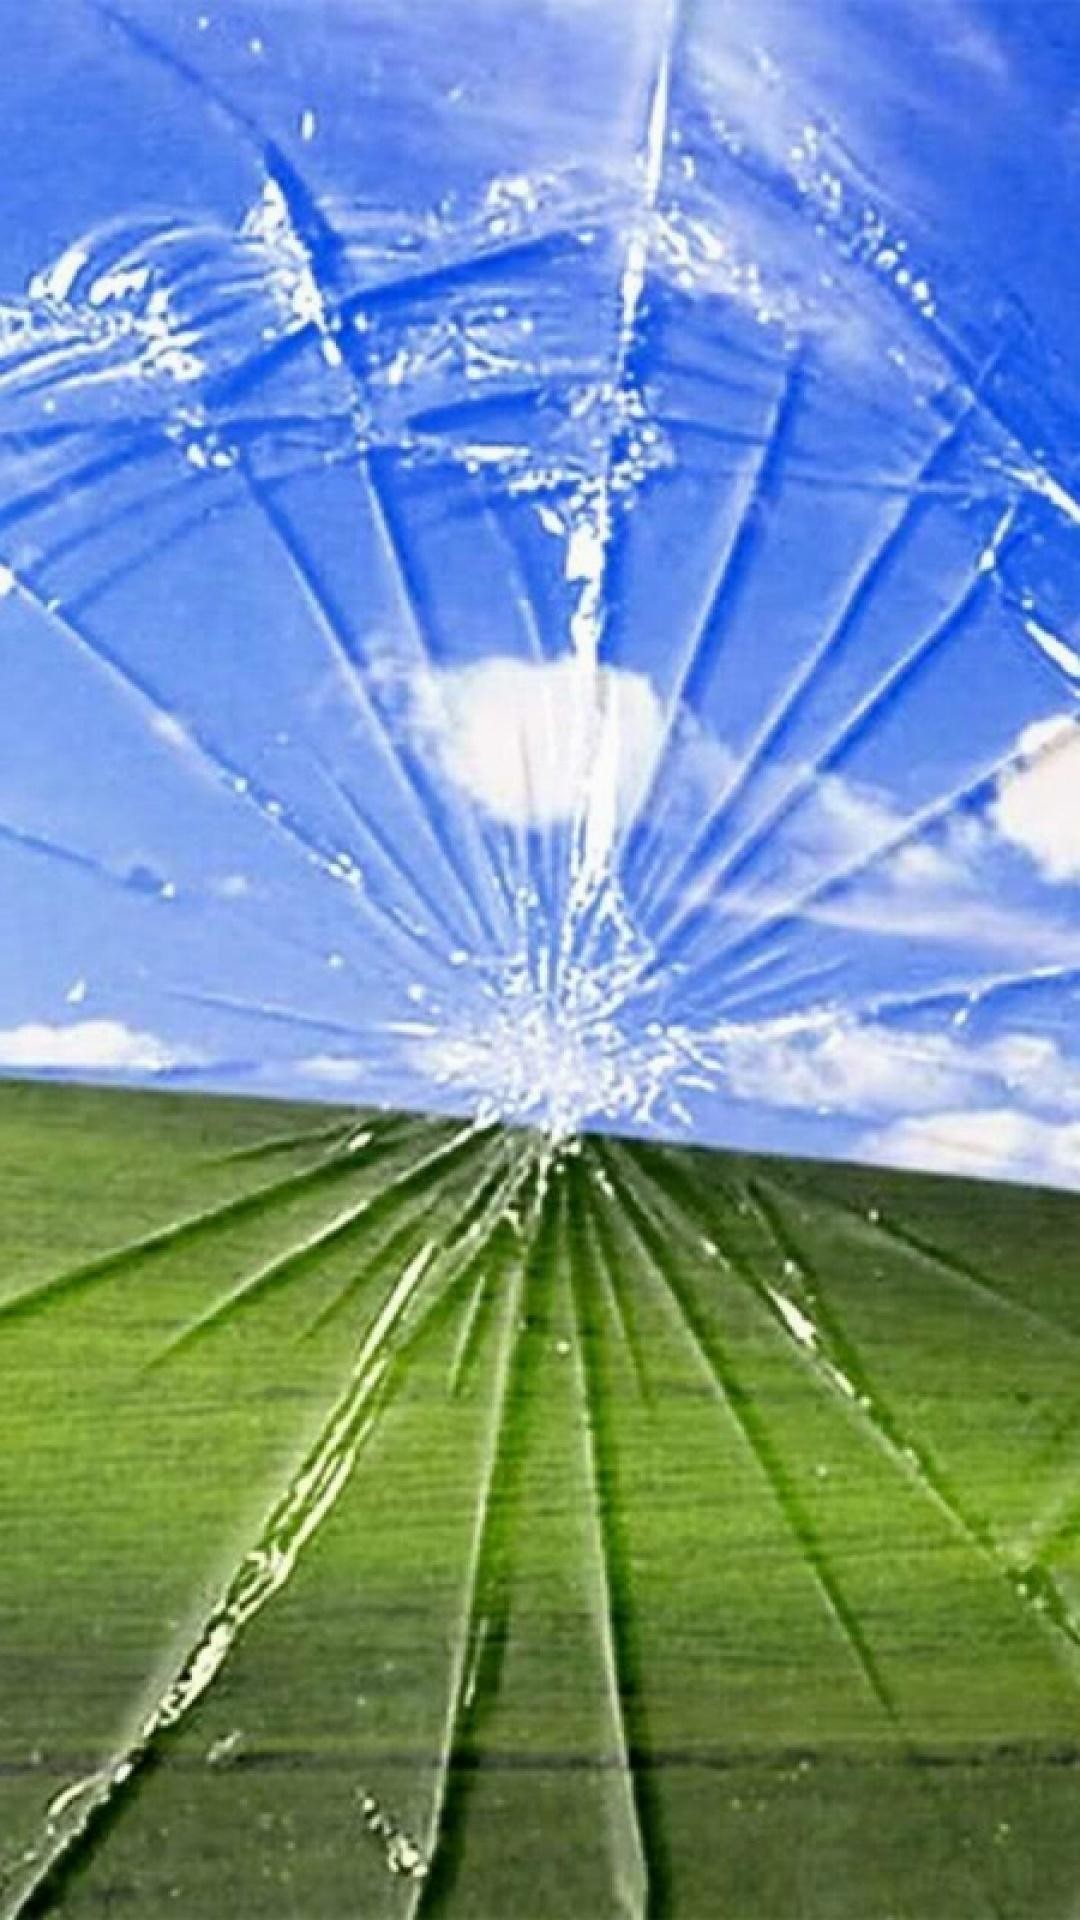 Cracked Computer Wallpaper (72+ images)